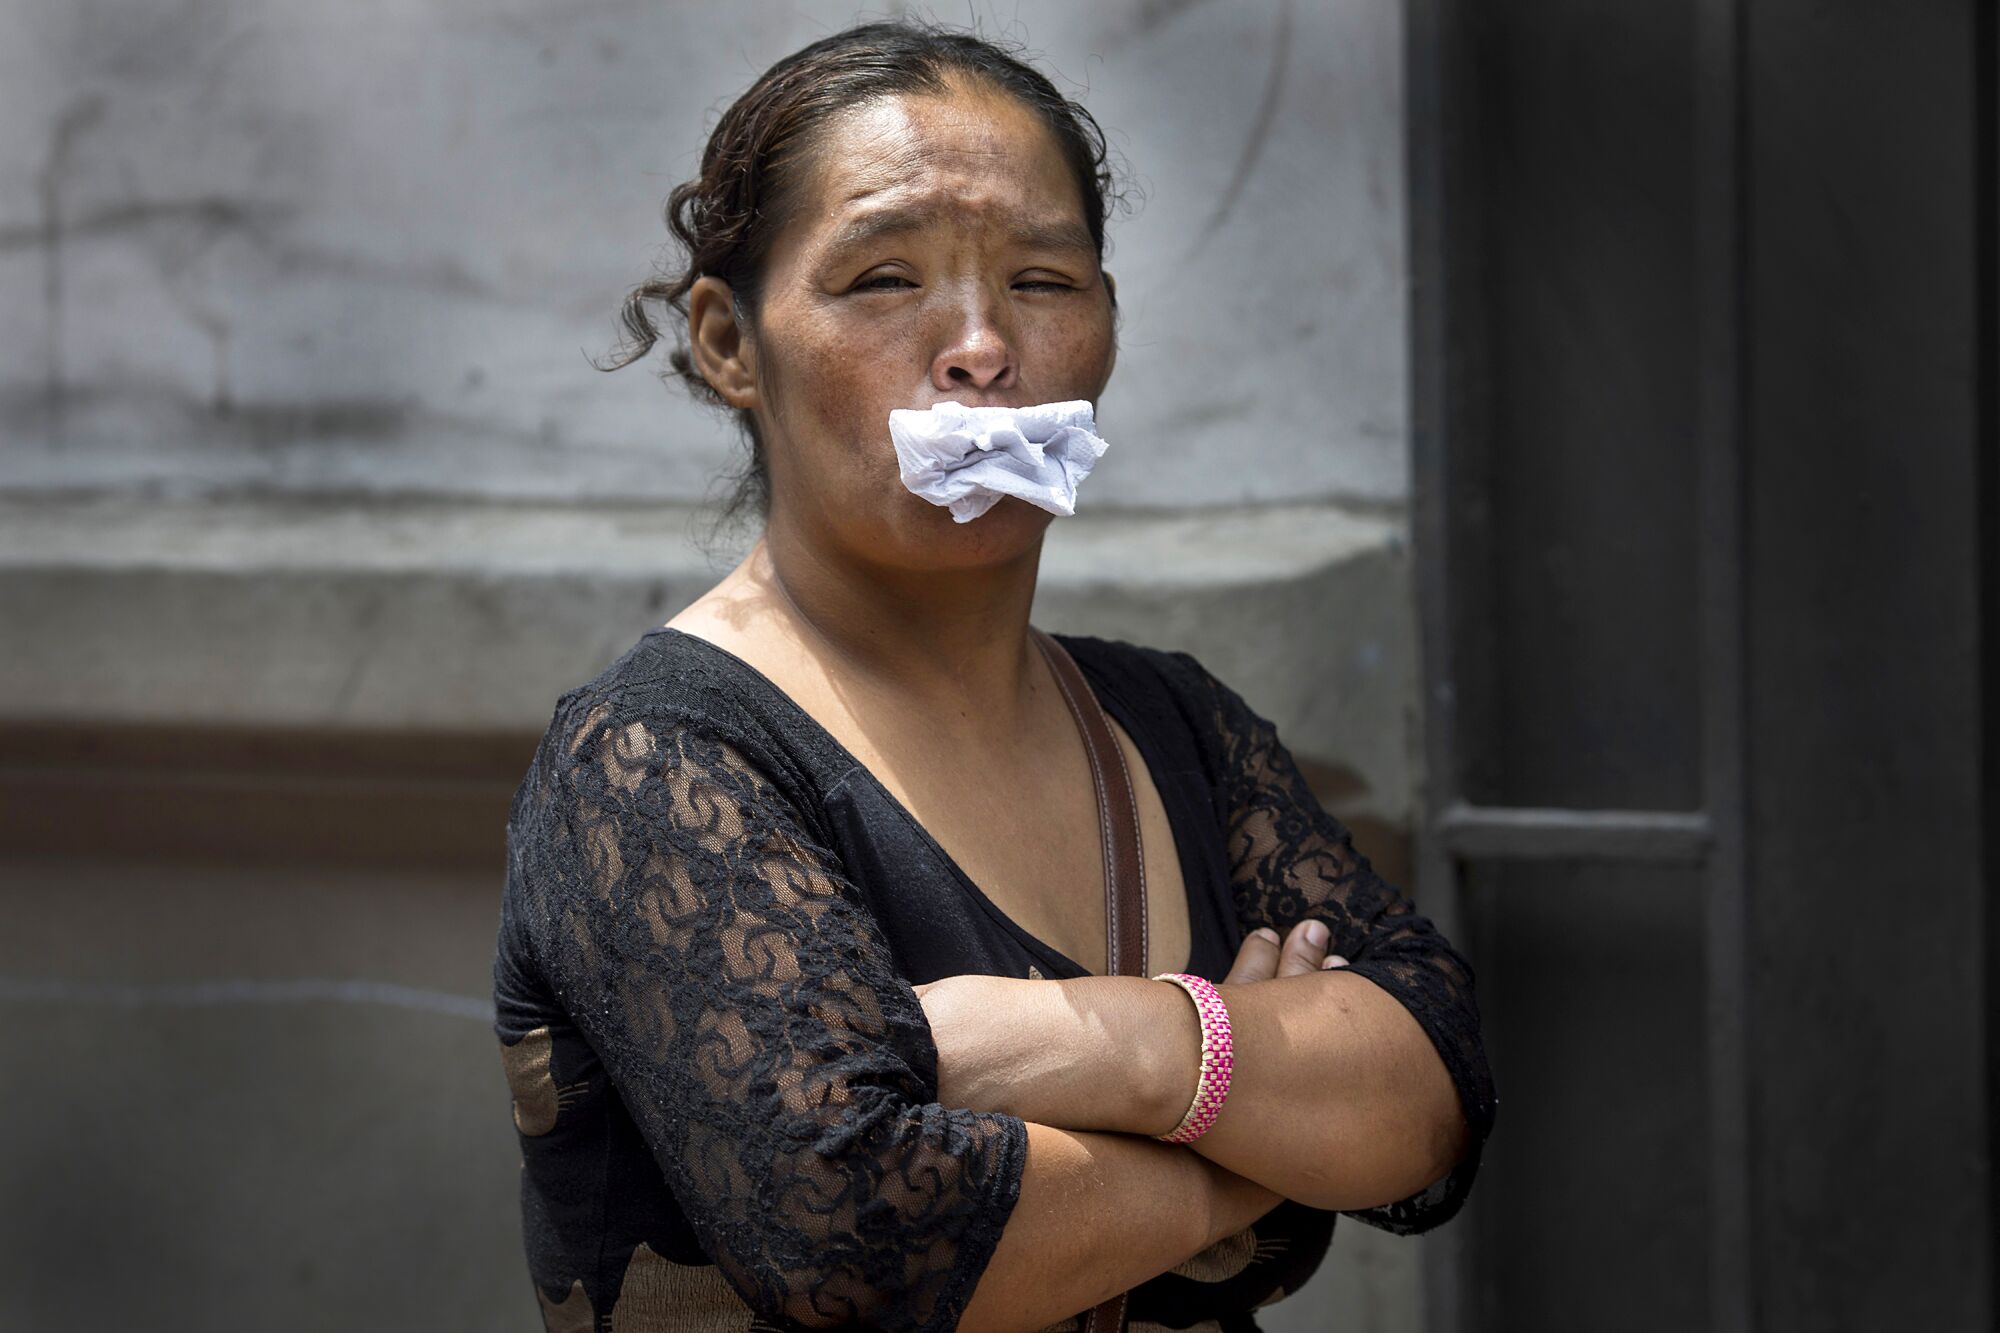 PERU: A woman stuffs paper into her mouth, her alternative to a face mask, as she waits in line for a free lunch from a charity organization that helps the homeless in Lima.